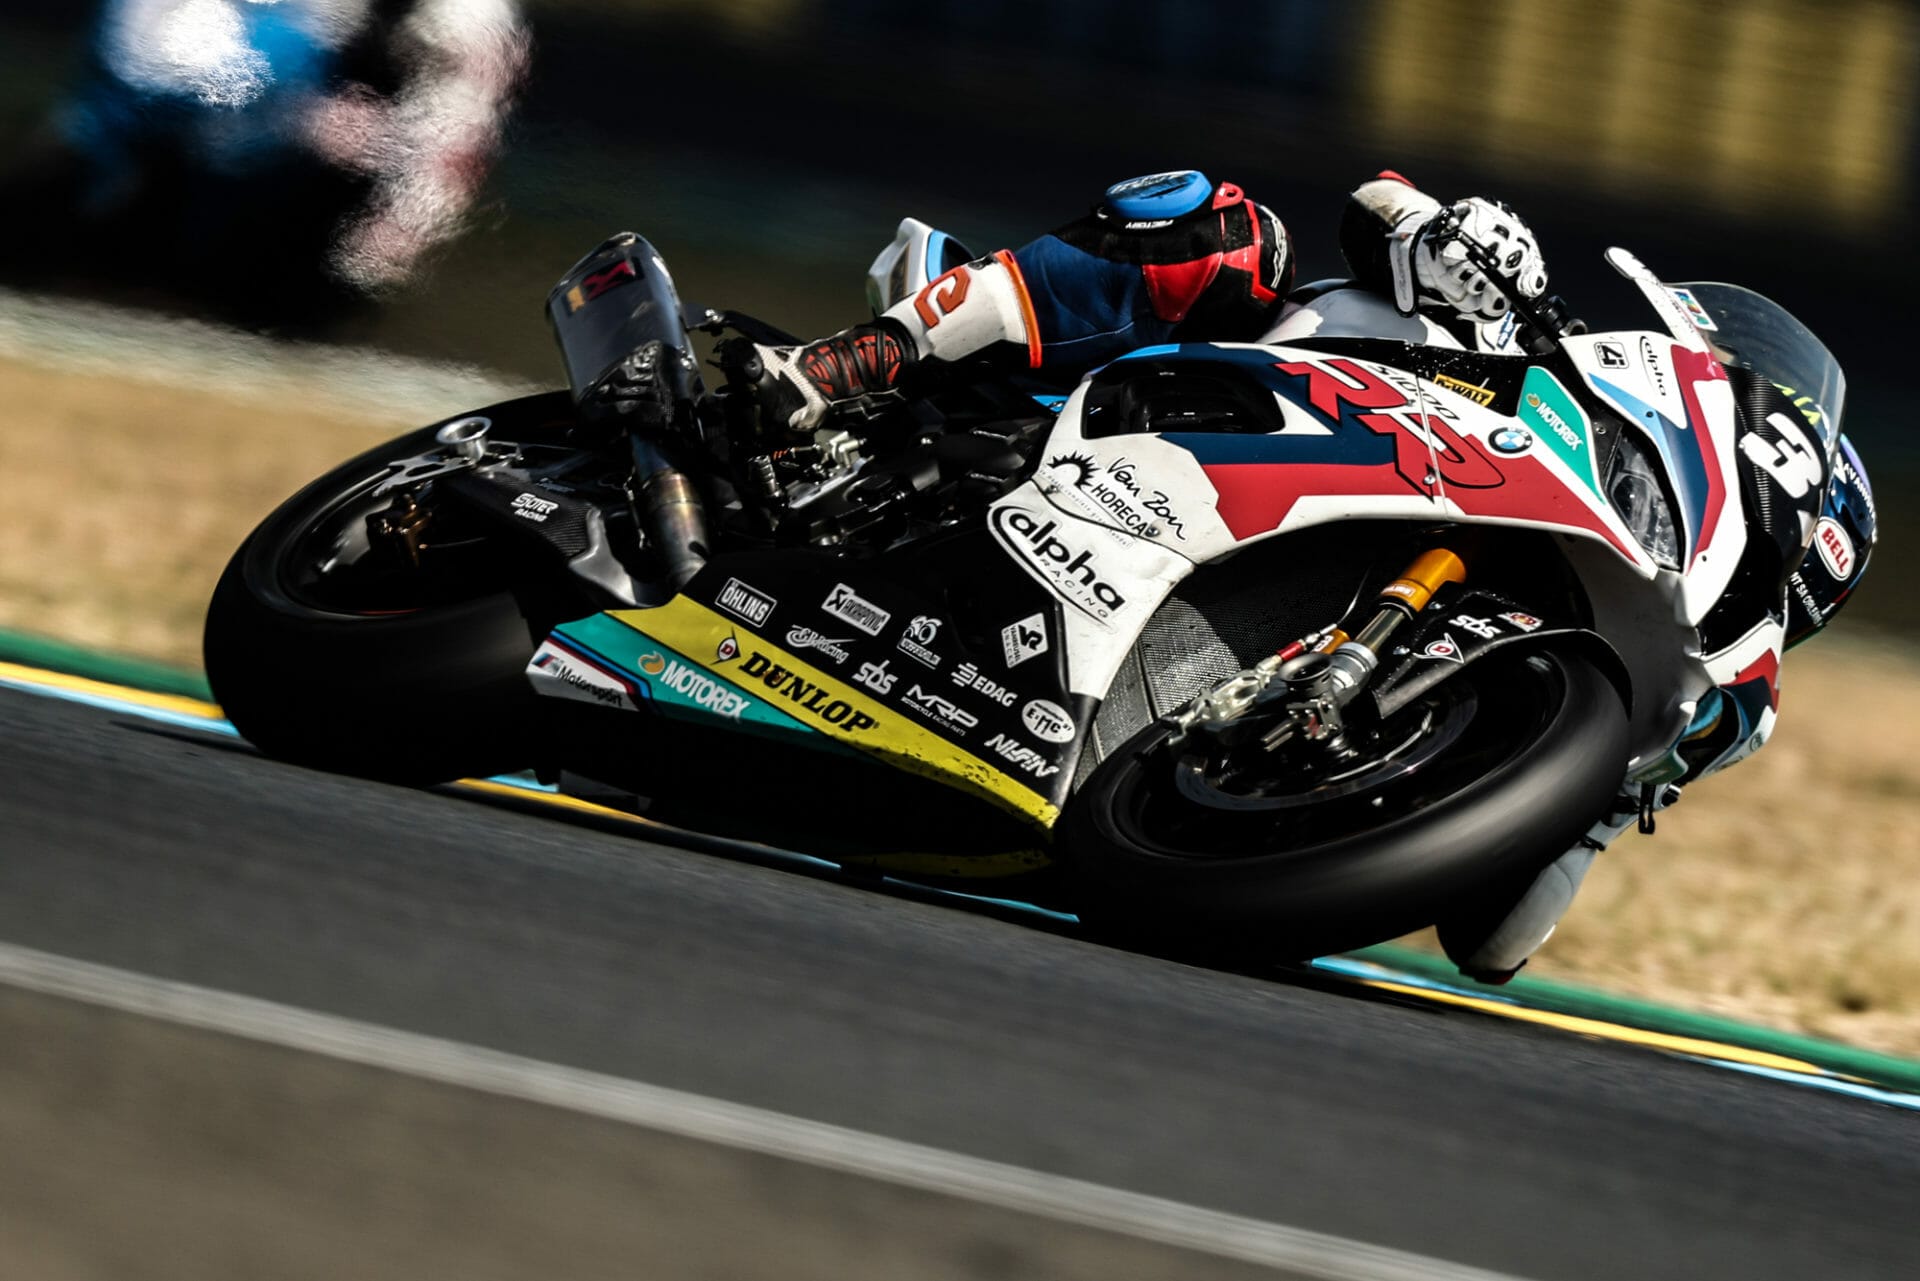 New date for the 24h of Le Mans, 8h Oschersleben postponed
- also in the MOTORCYCLES.NEWS APP